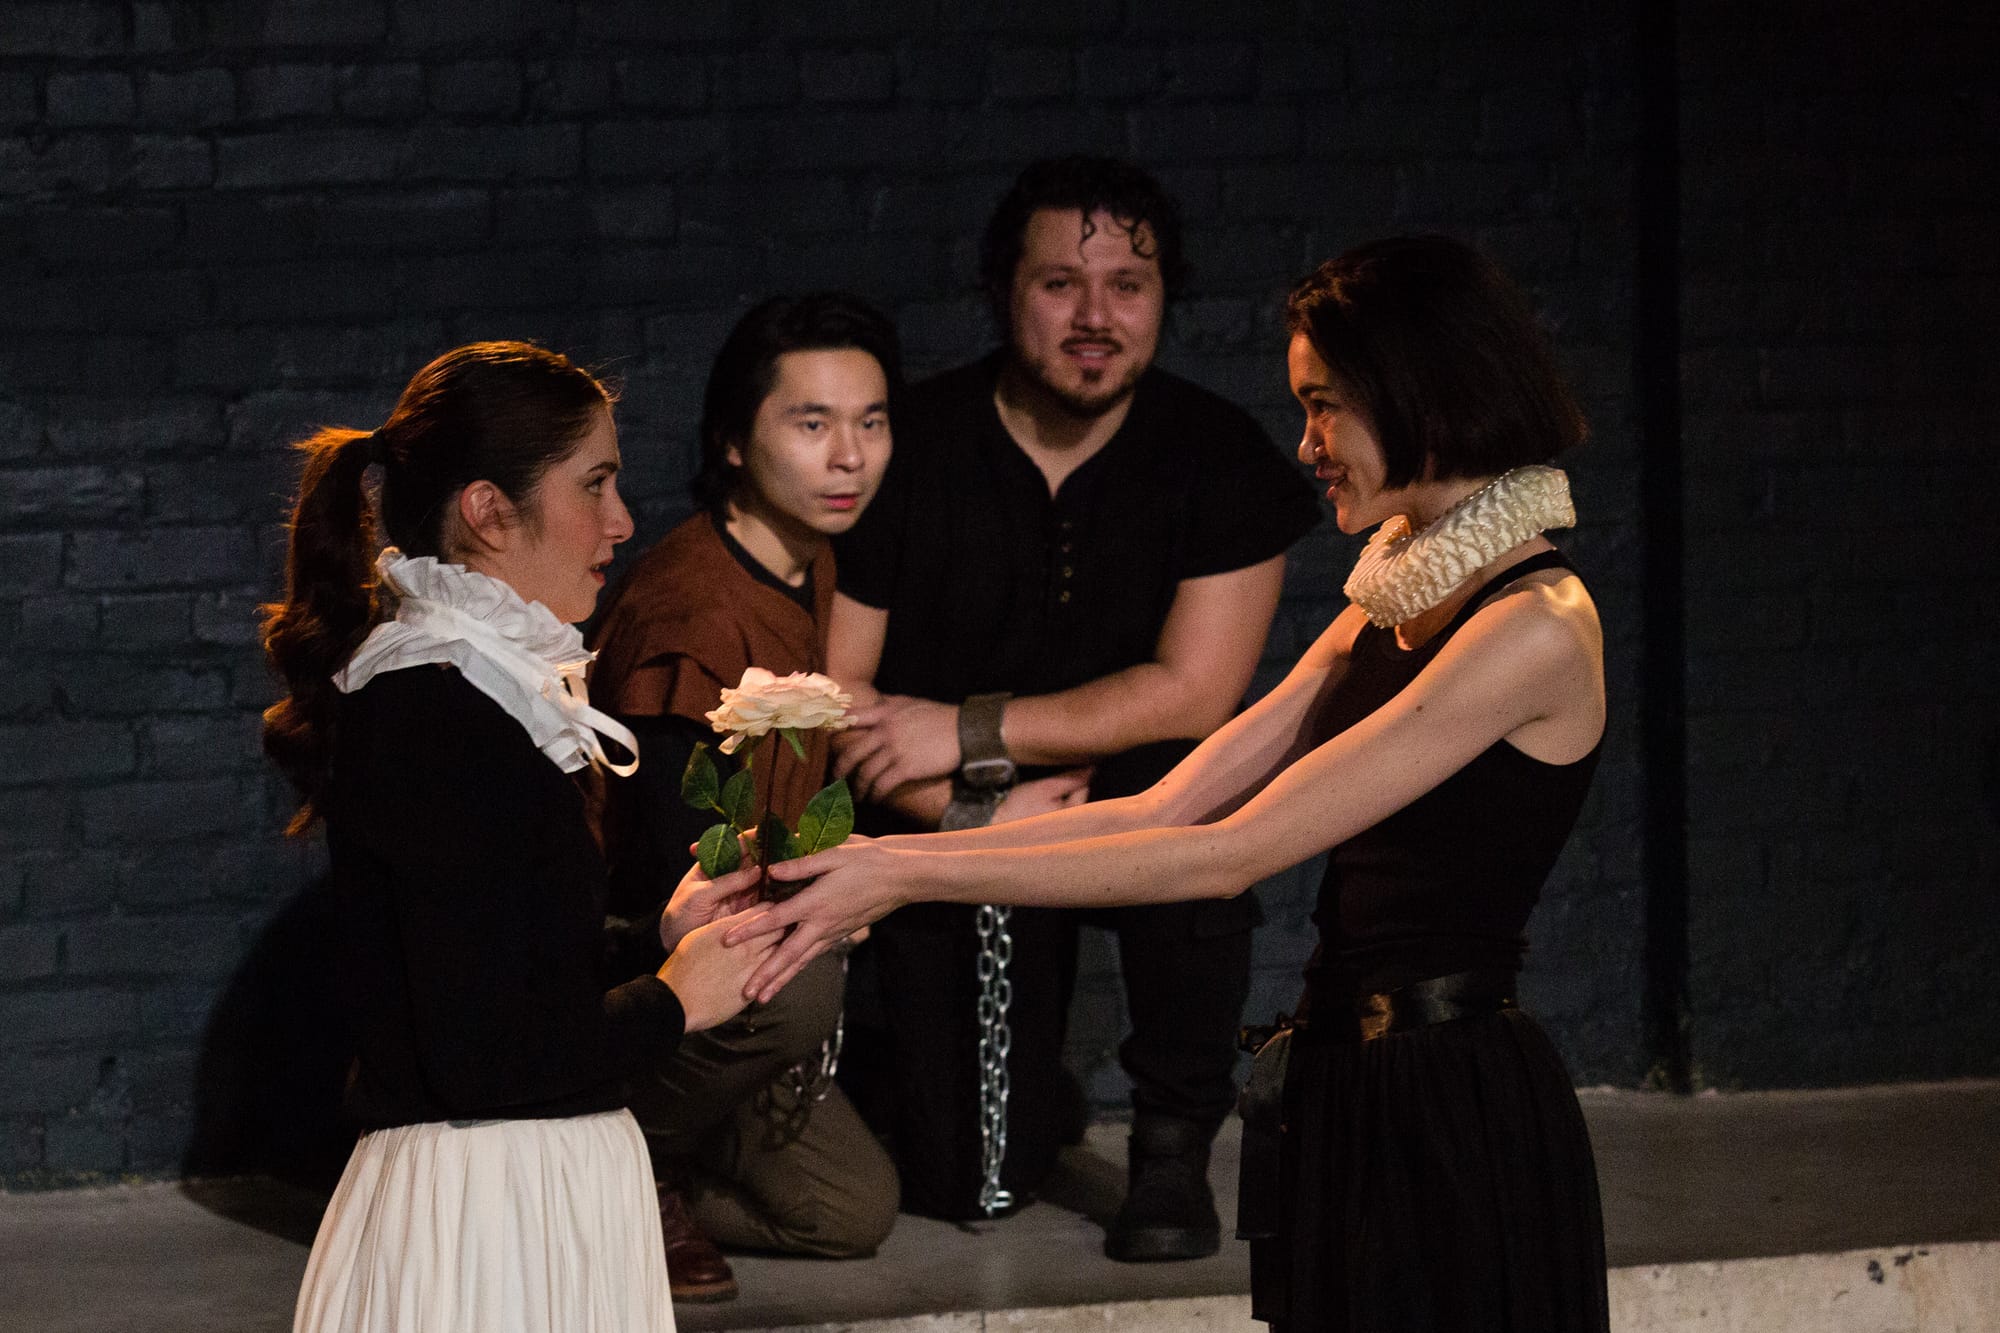 Two bold, fresh takes on late Shakespeare plays